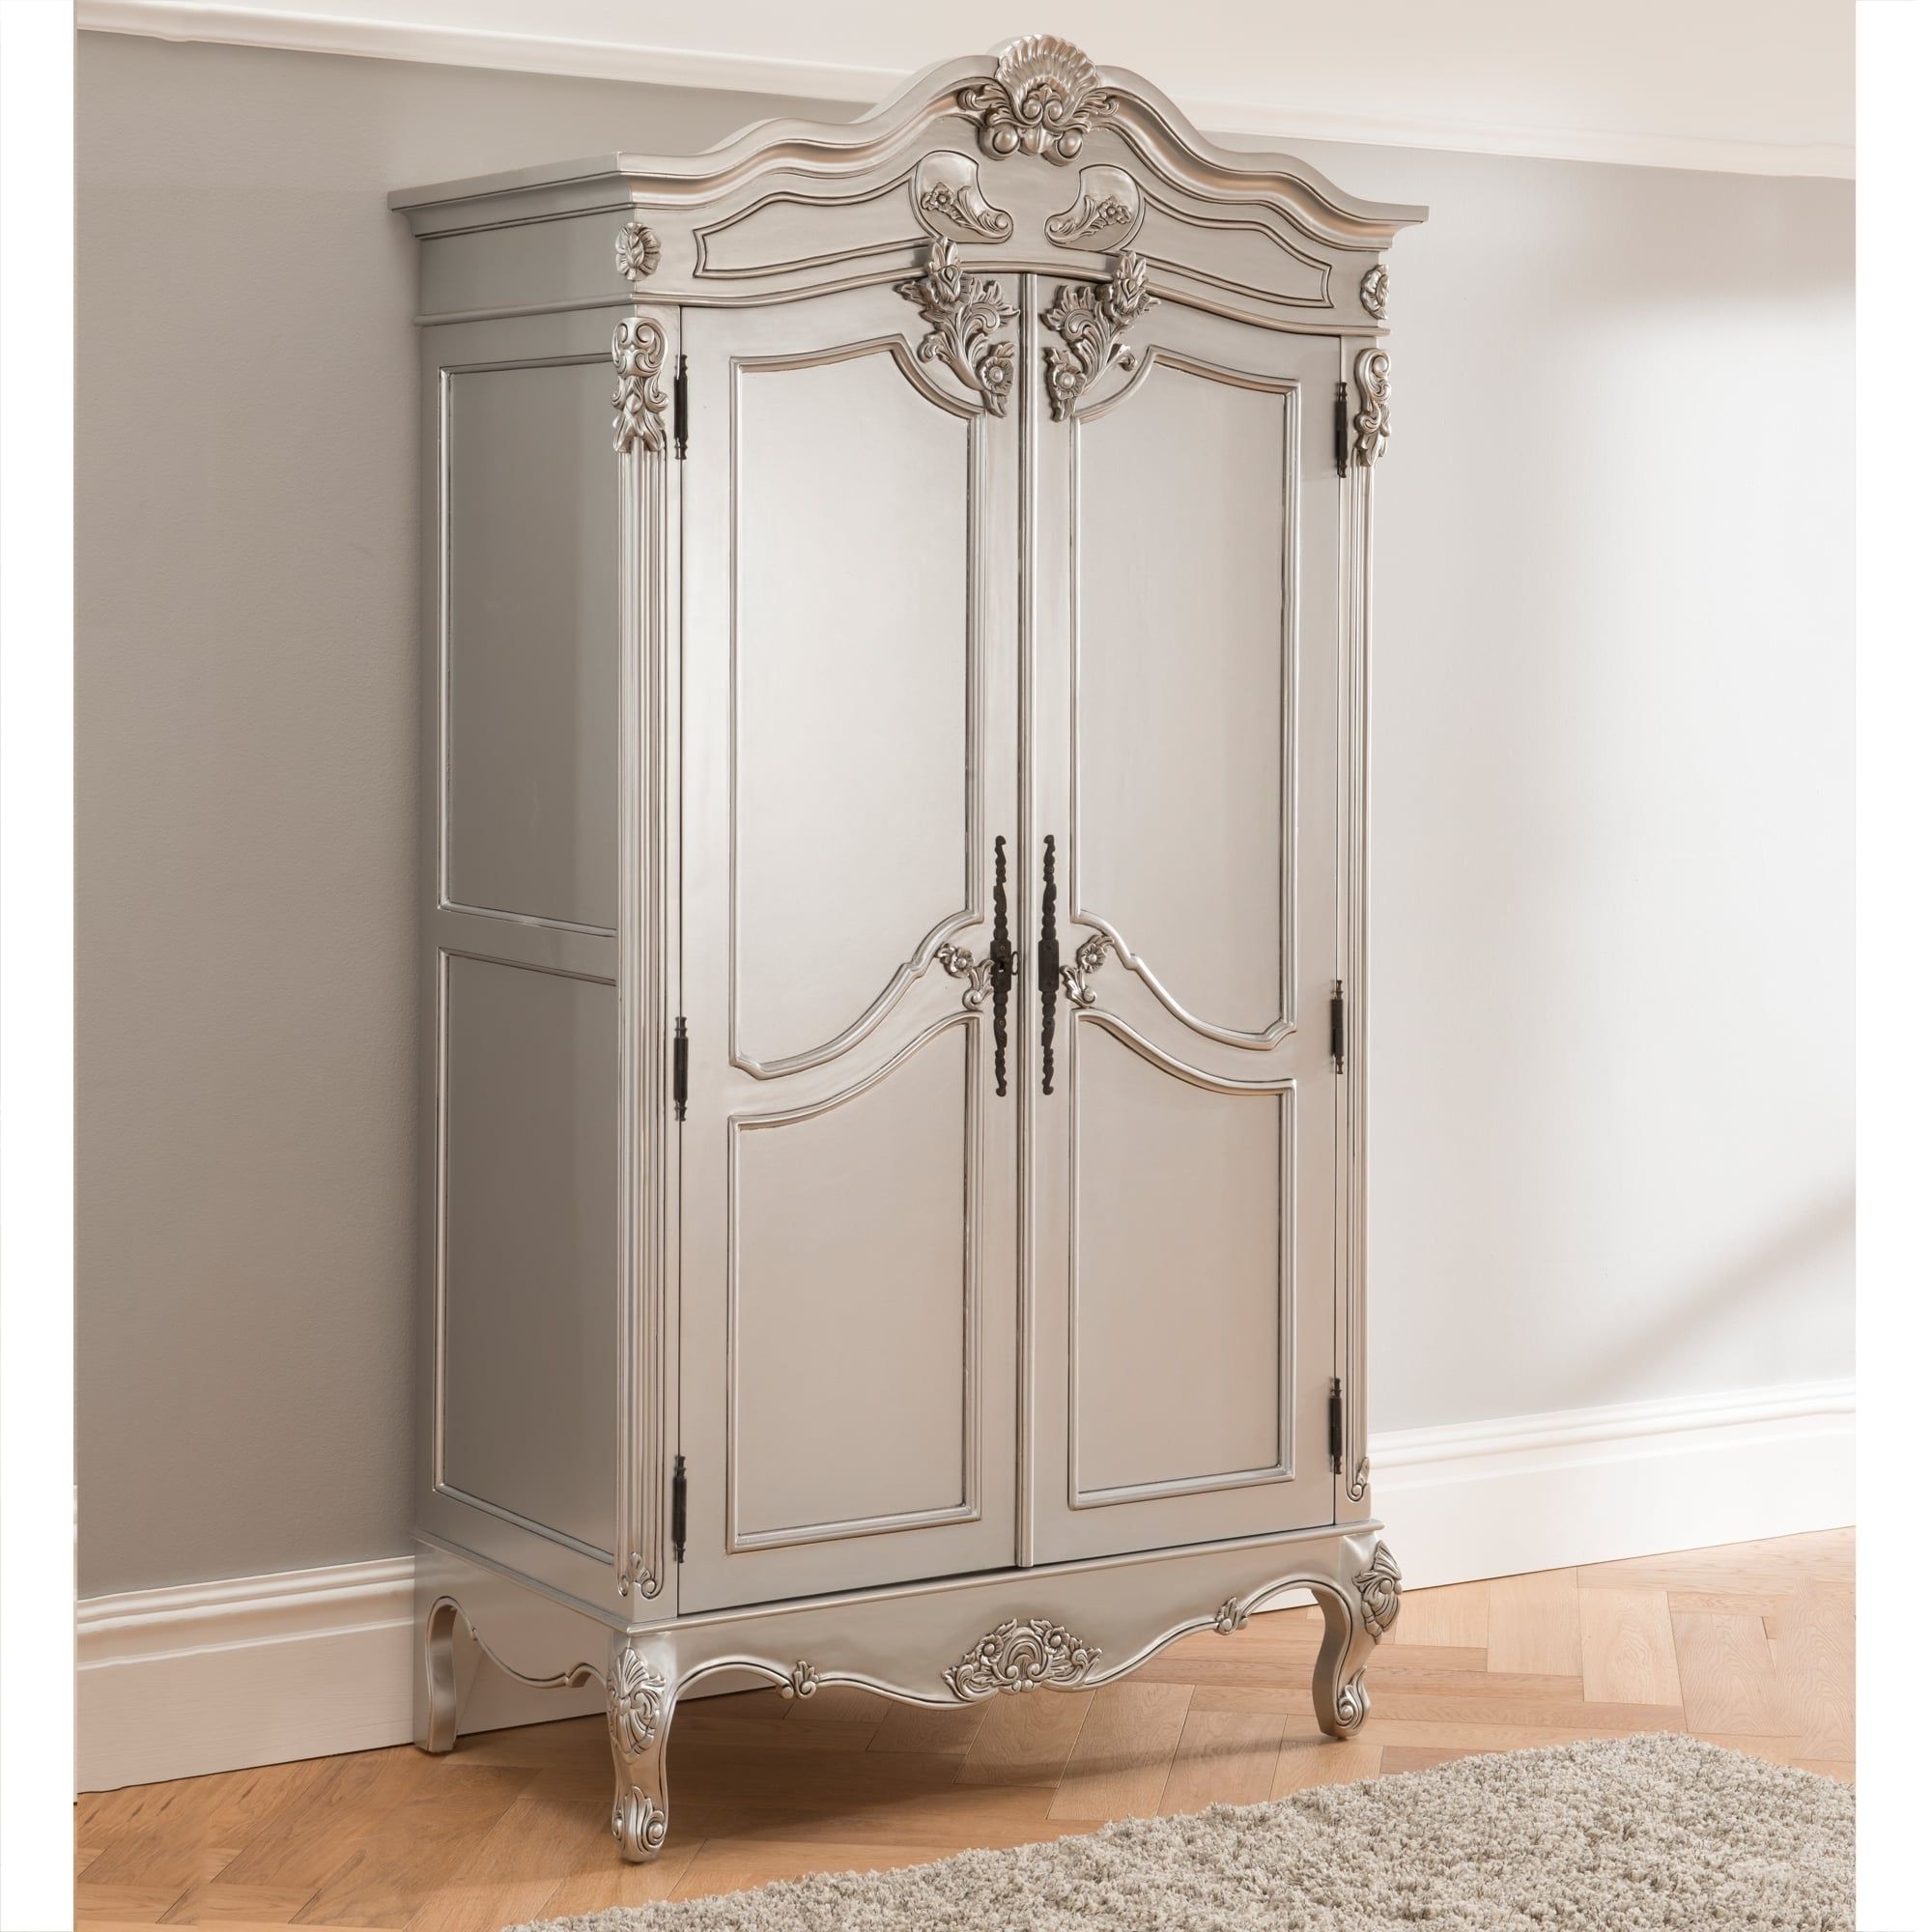 Baroque Antique French Wardrobe Works Exceptional Alongside Our Intended For Popular Cheap Shabby Chic Wardrobes (View 3 of 15)